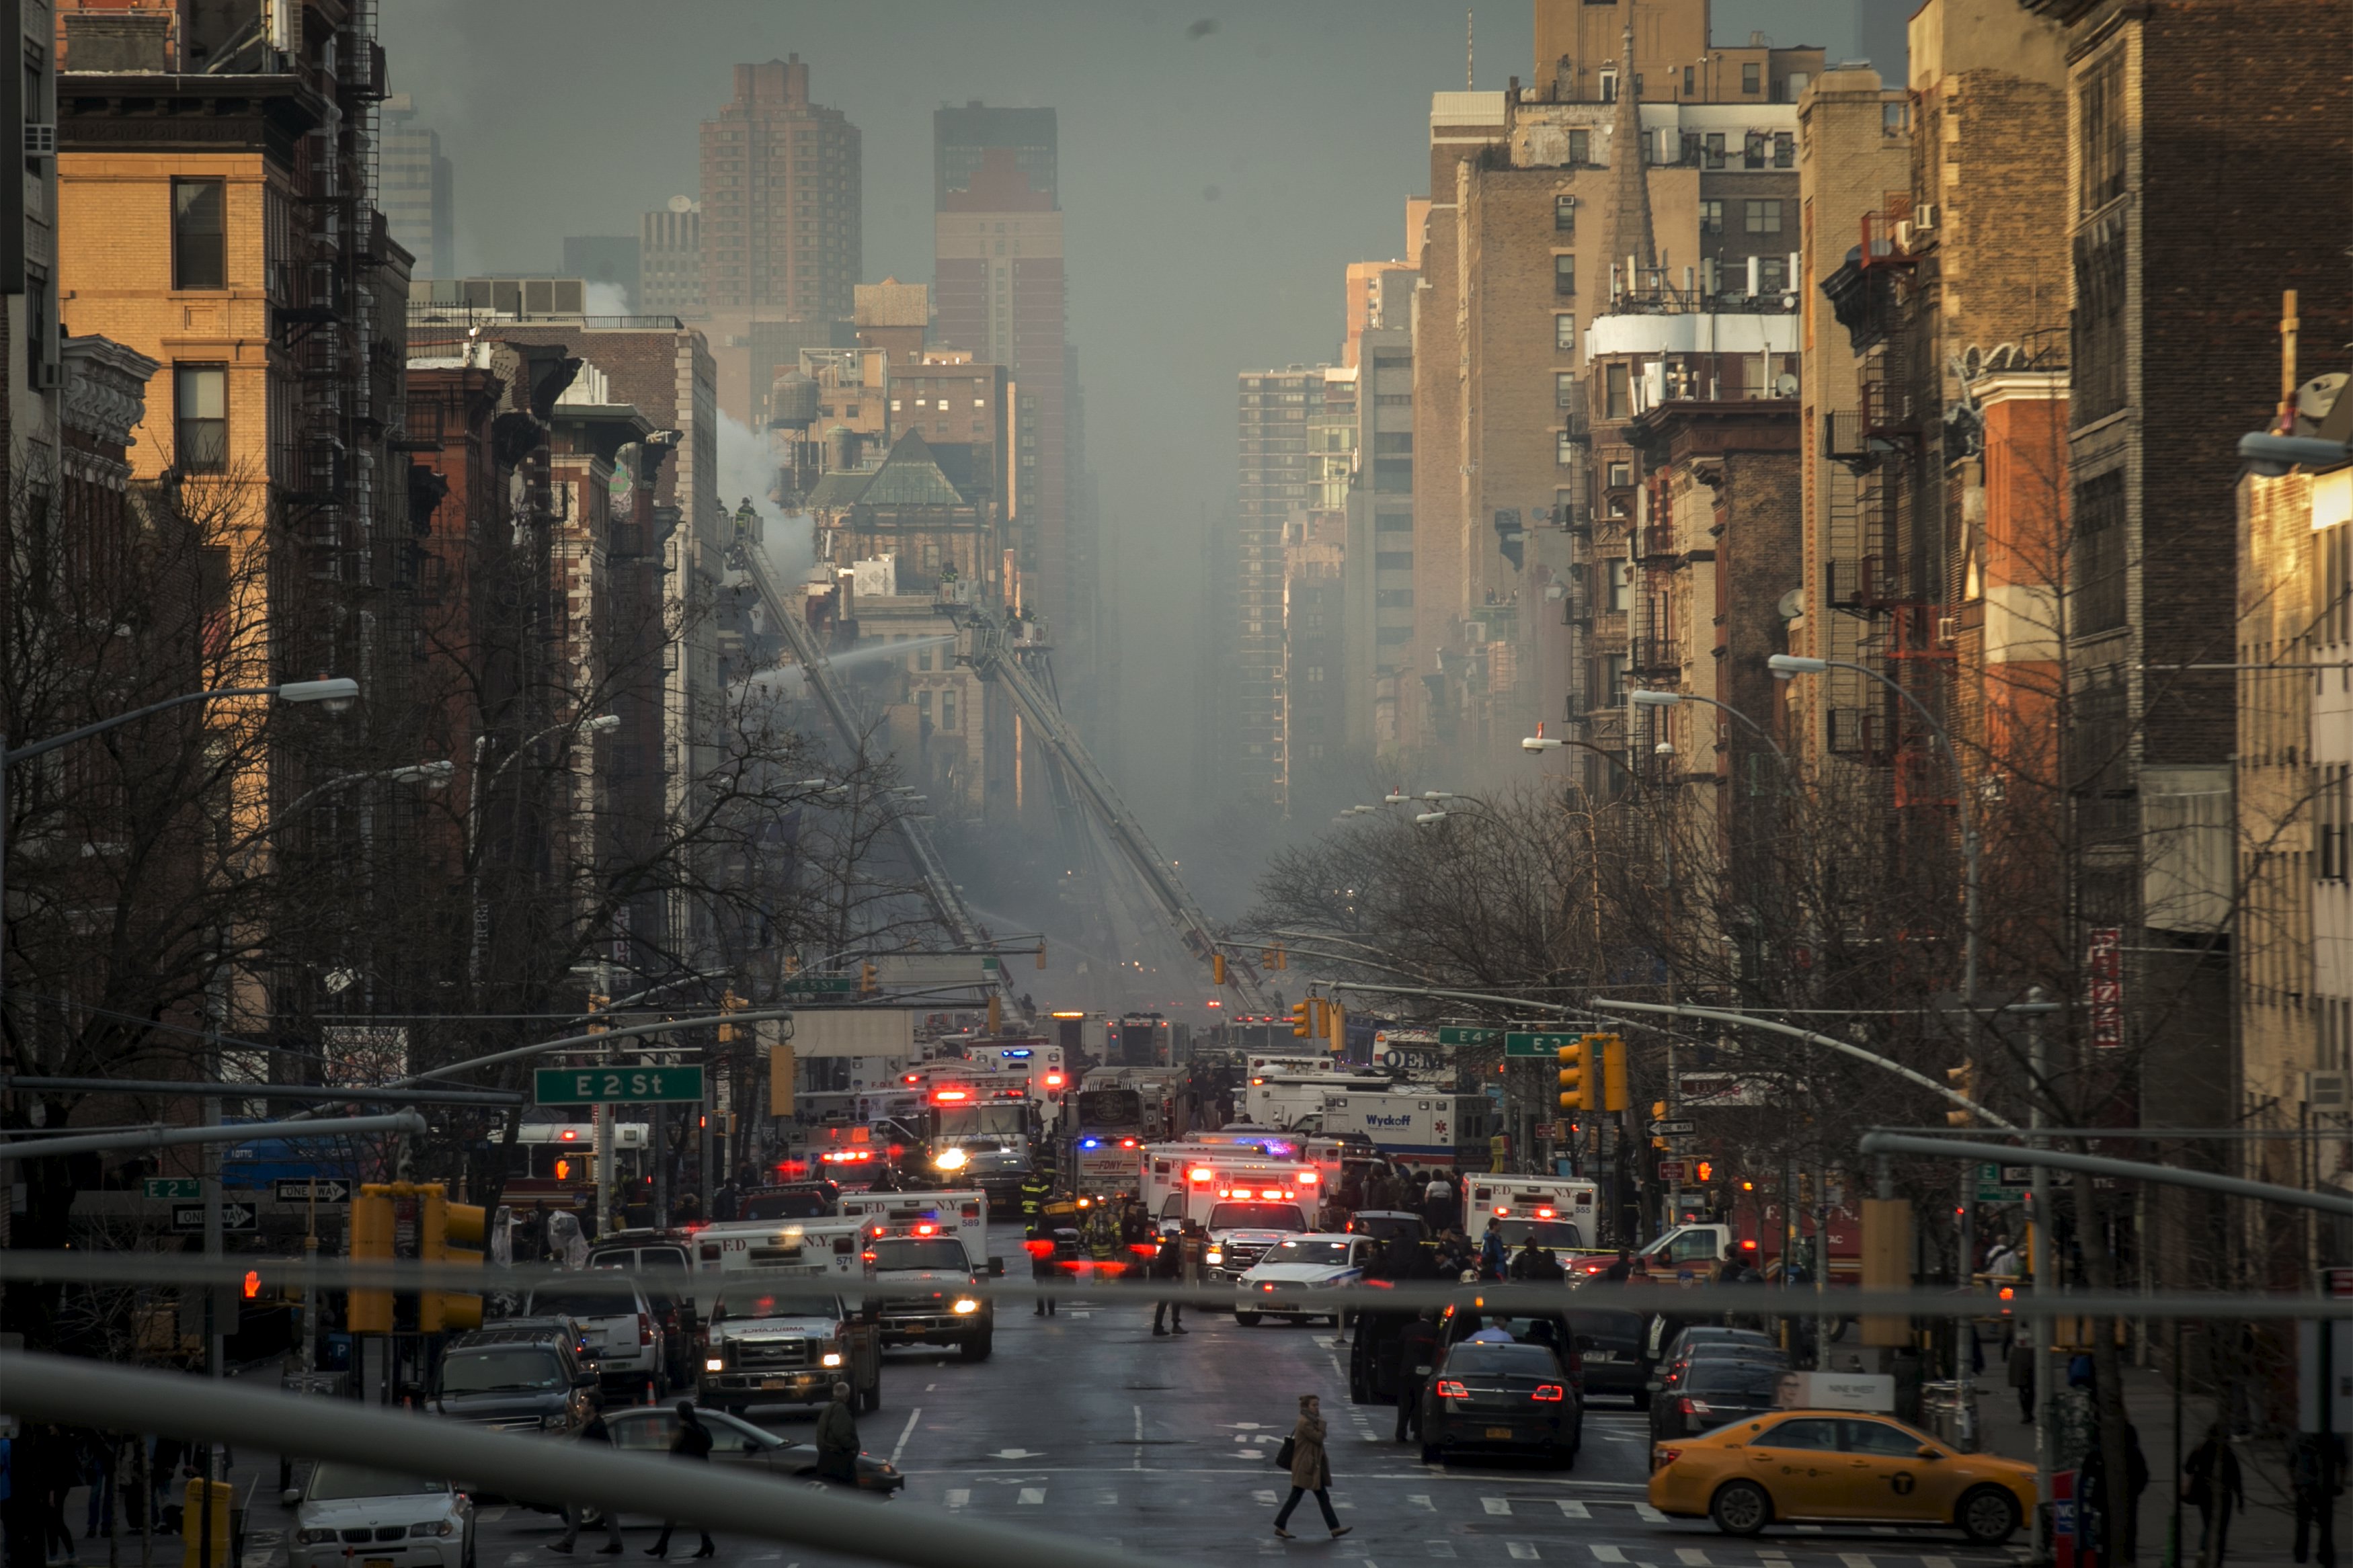 New York City buildings collapse in possible gas blast, injuring 12 people